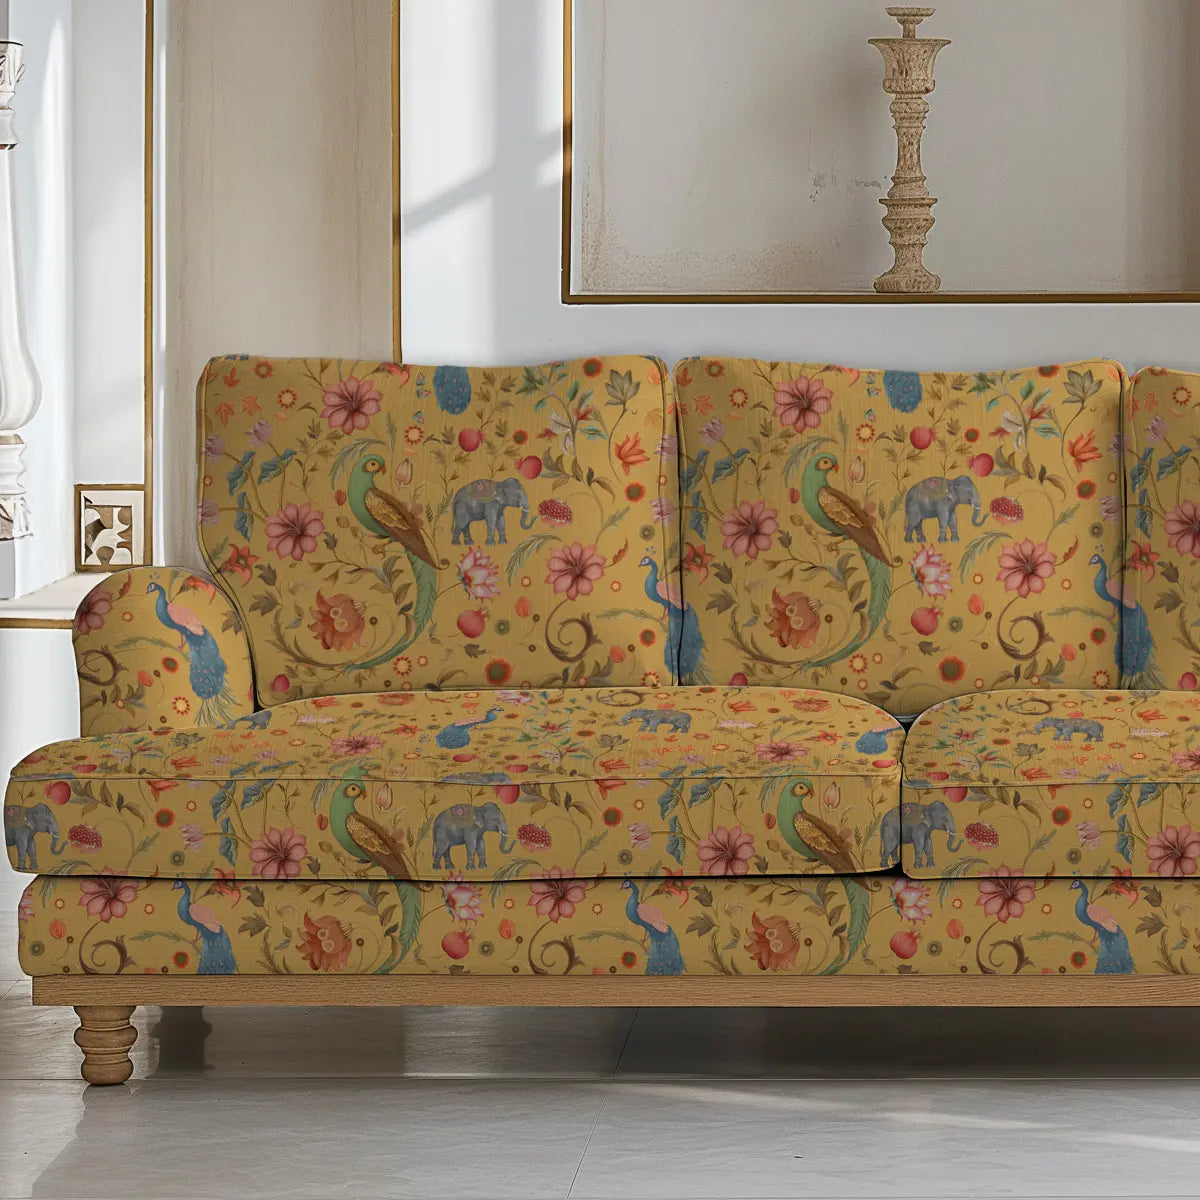 Sanjhi Indian Sofa and Chairs Upholstery Fabric Elephant indian floral design Yellow